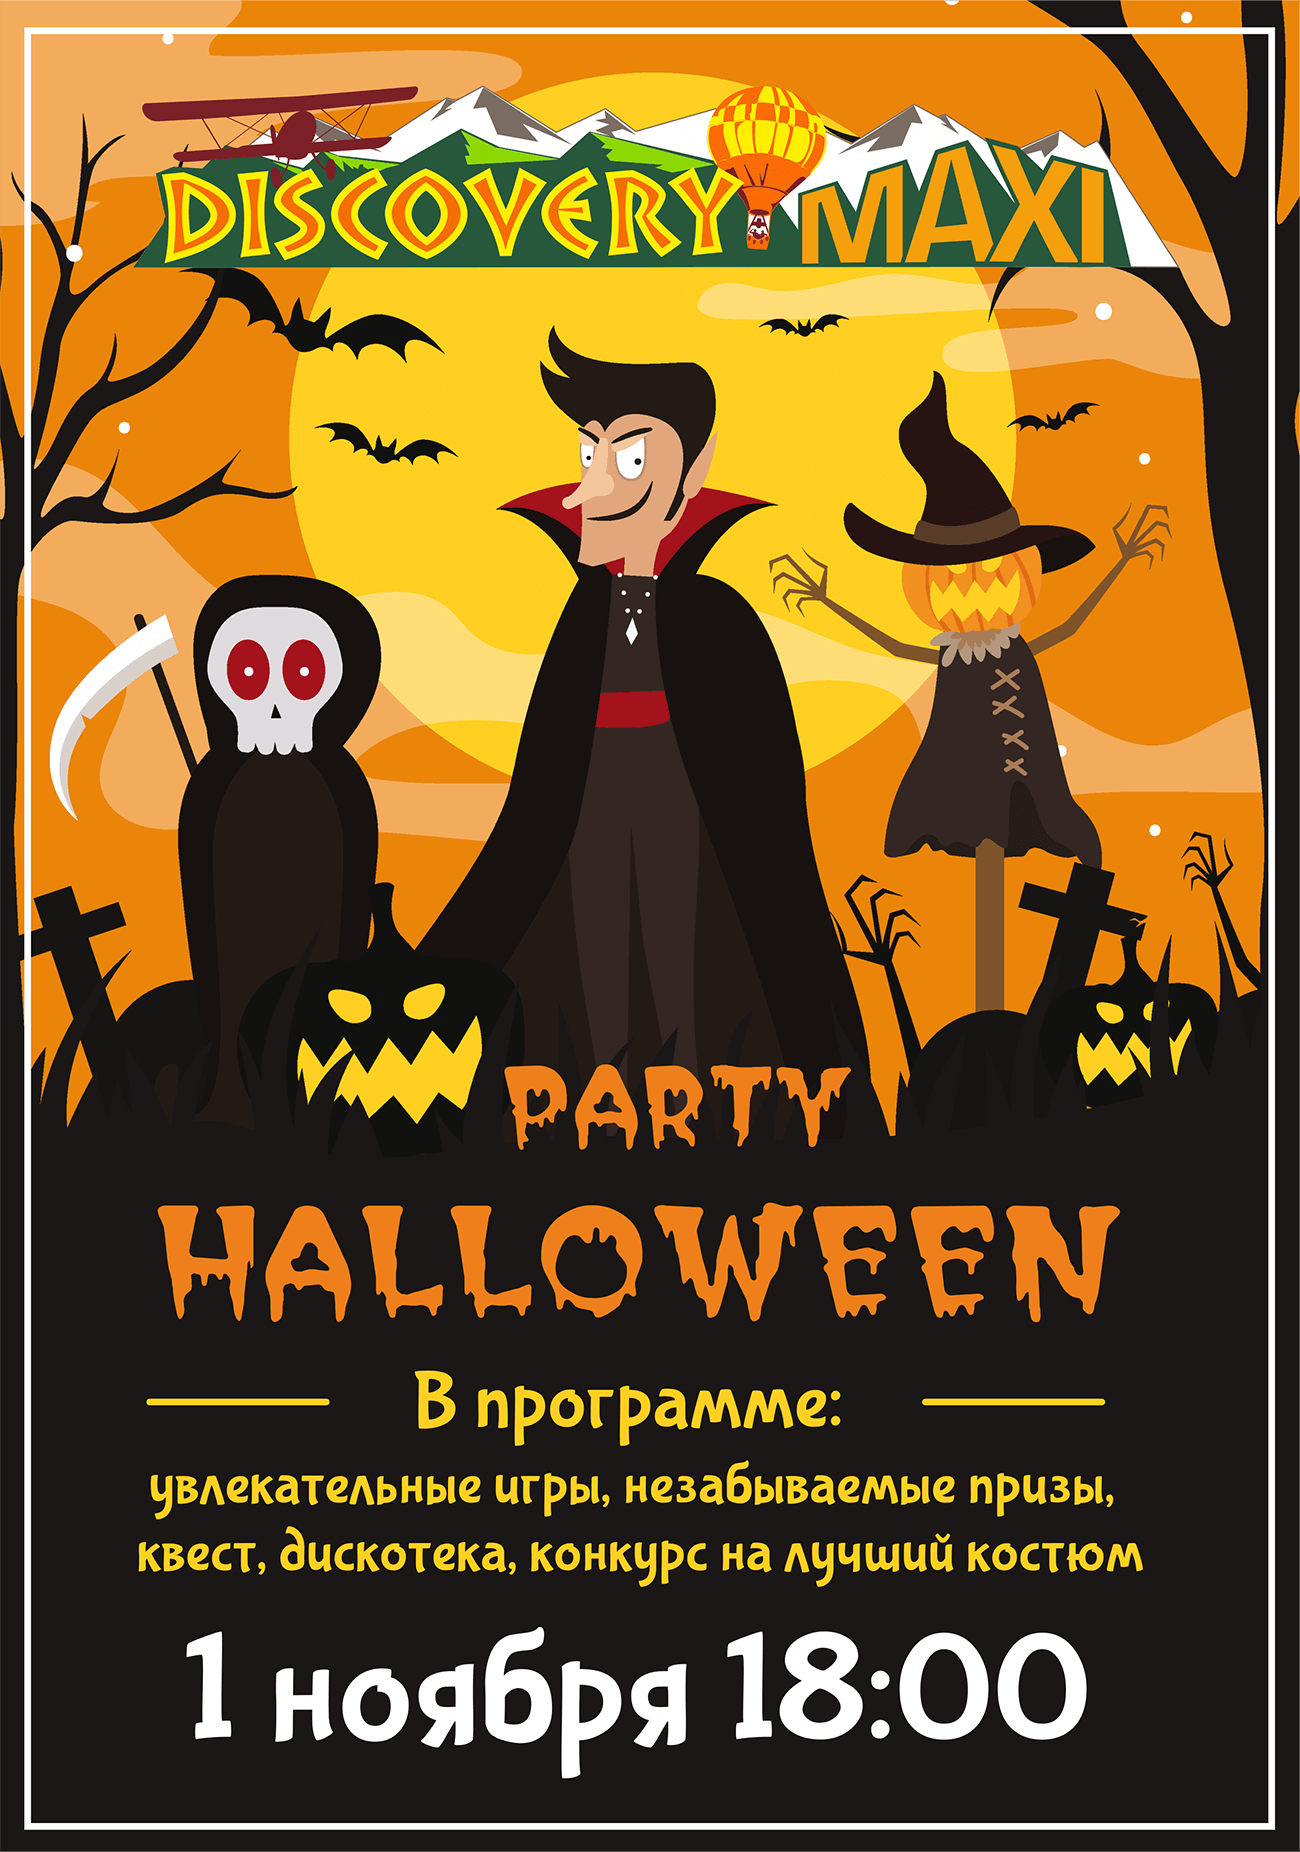 Halloween Party в «Discovery Maxi»!